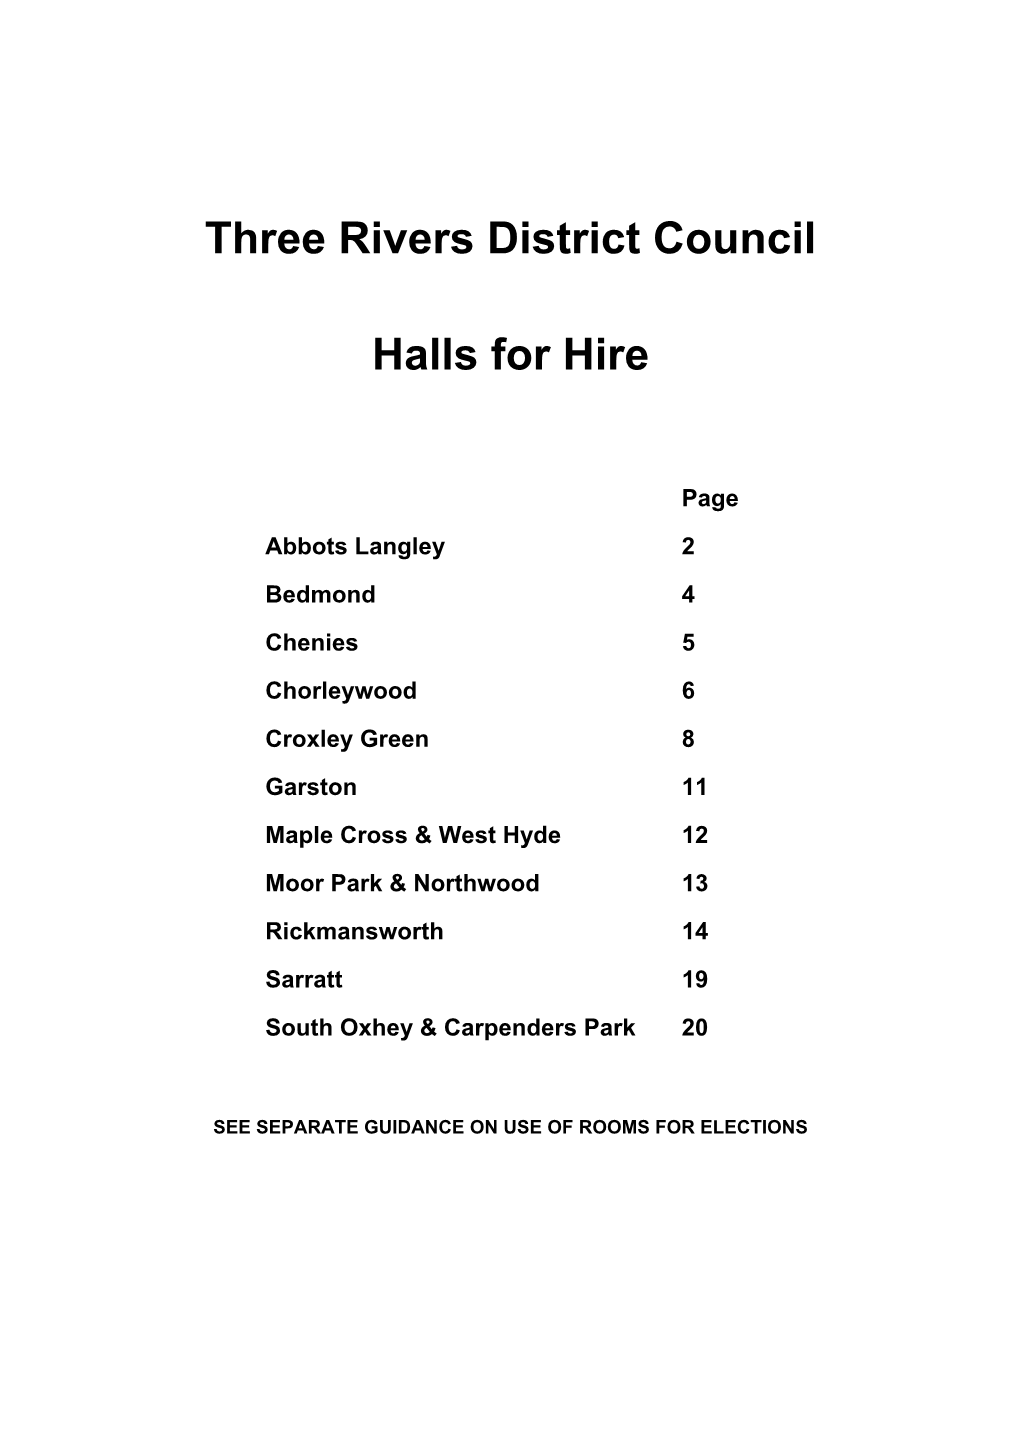 Three Rivers District Council Halls for Hire